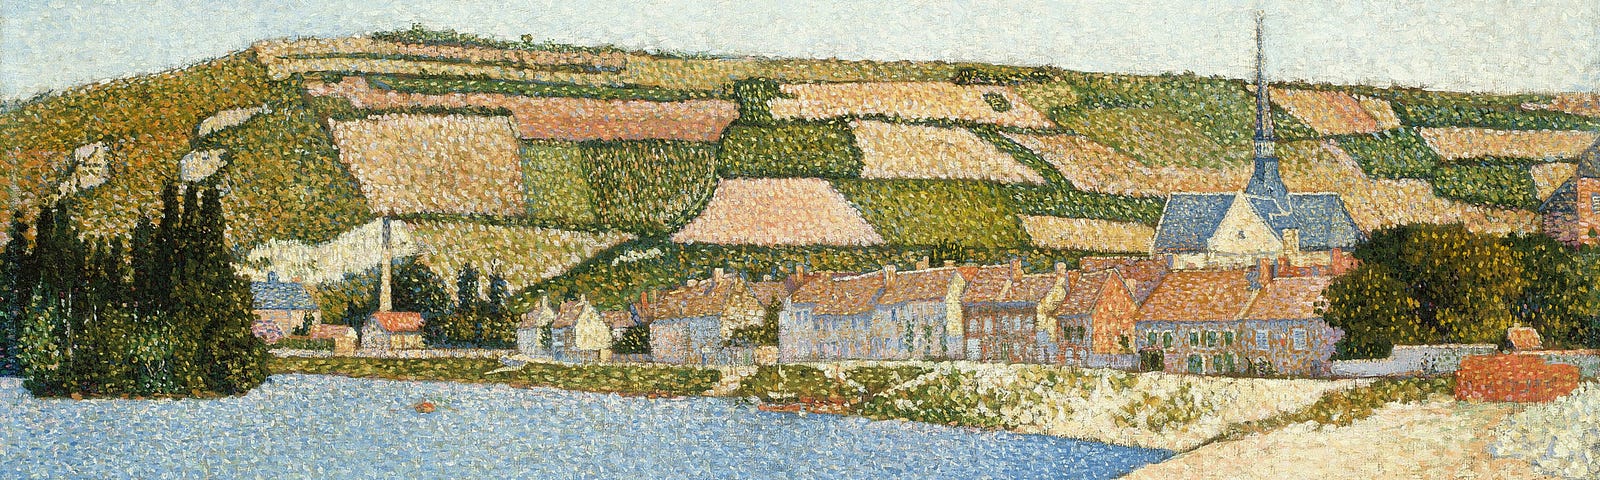 View of the harbor of Les Andelys, a village on the Seine River near Giverny, France, part of Paul Signac’s first series of works painted in dots and dashes of contrasting colors.